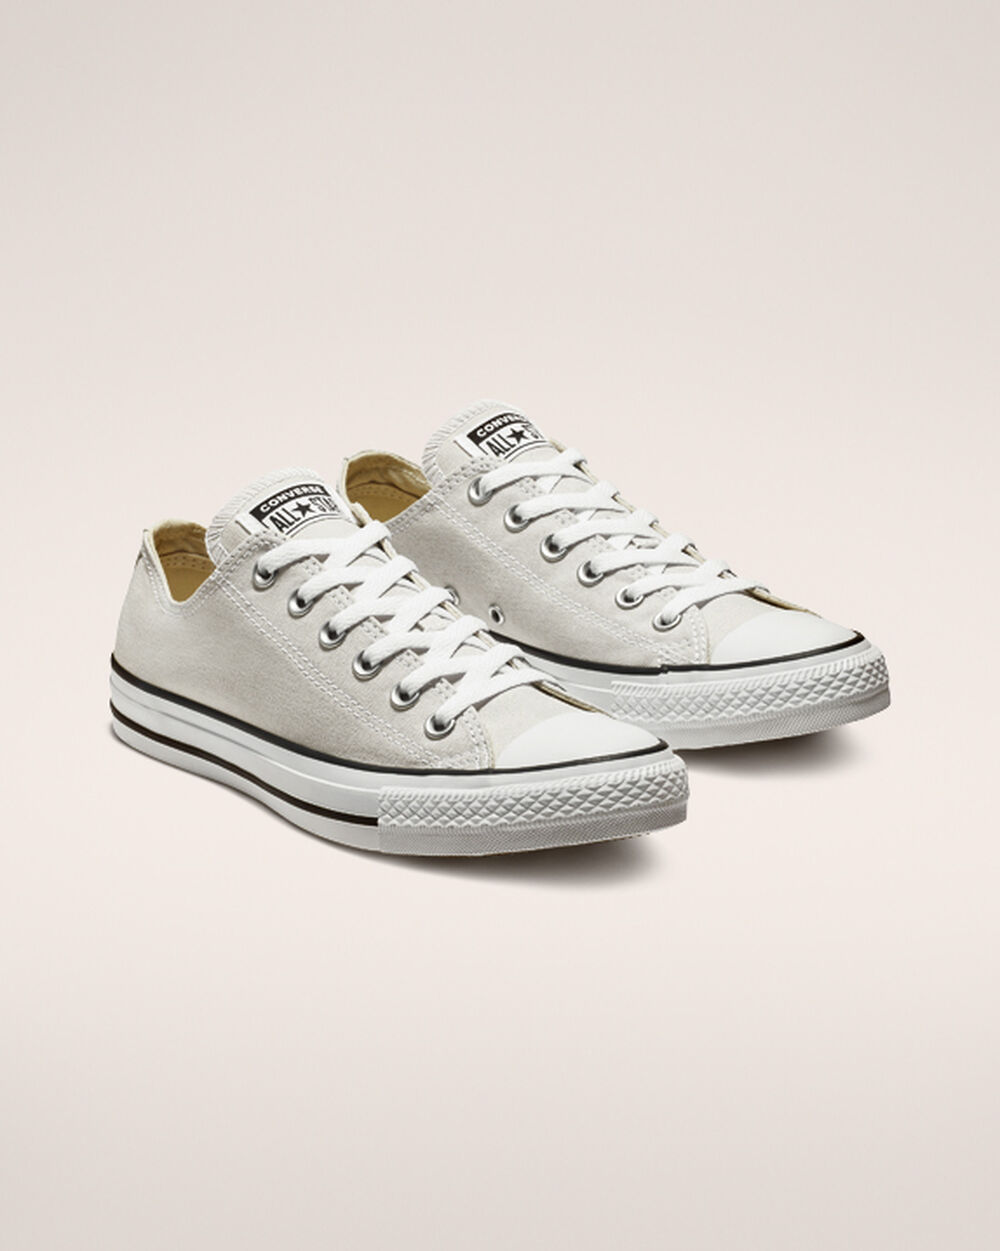 Tenis Converse Chuck Taylor All Star Mujer Grises Claro | Mexico-350646